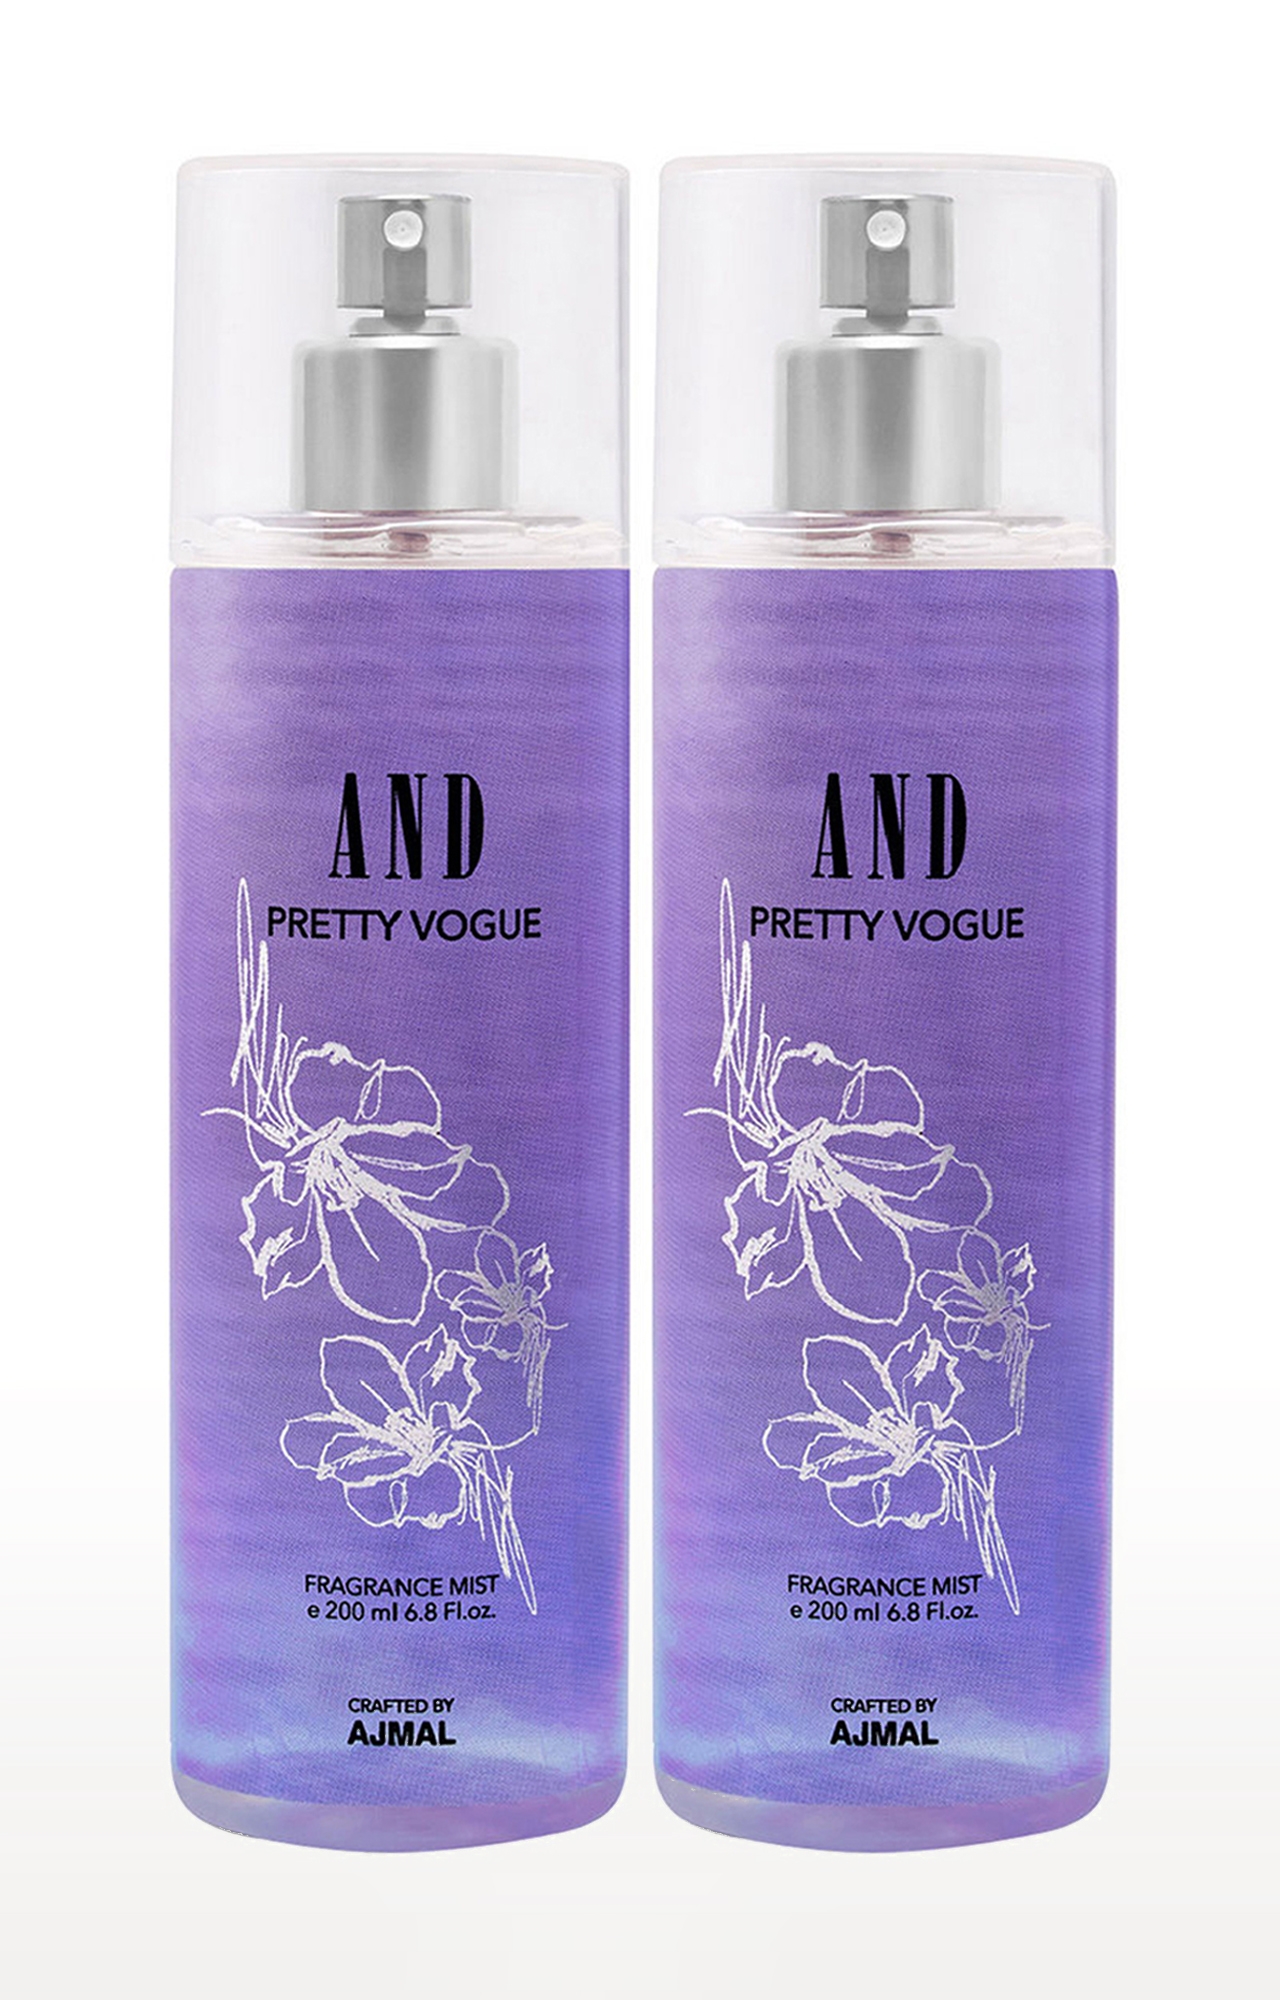 AND Crafted By Ajmal | AND Pretty Vogue Pack of 2 Body Mist 200ML each Long Lasting Scent Spray Gift for Women Perfume Crafted by Ajmal FREE